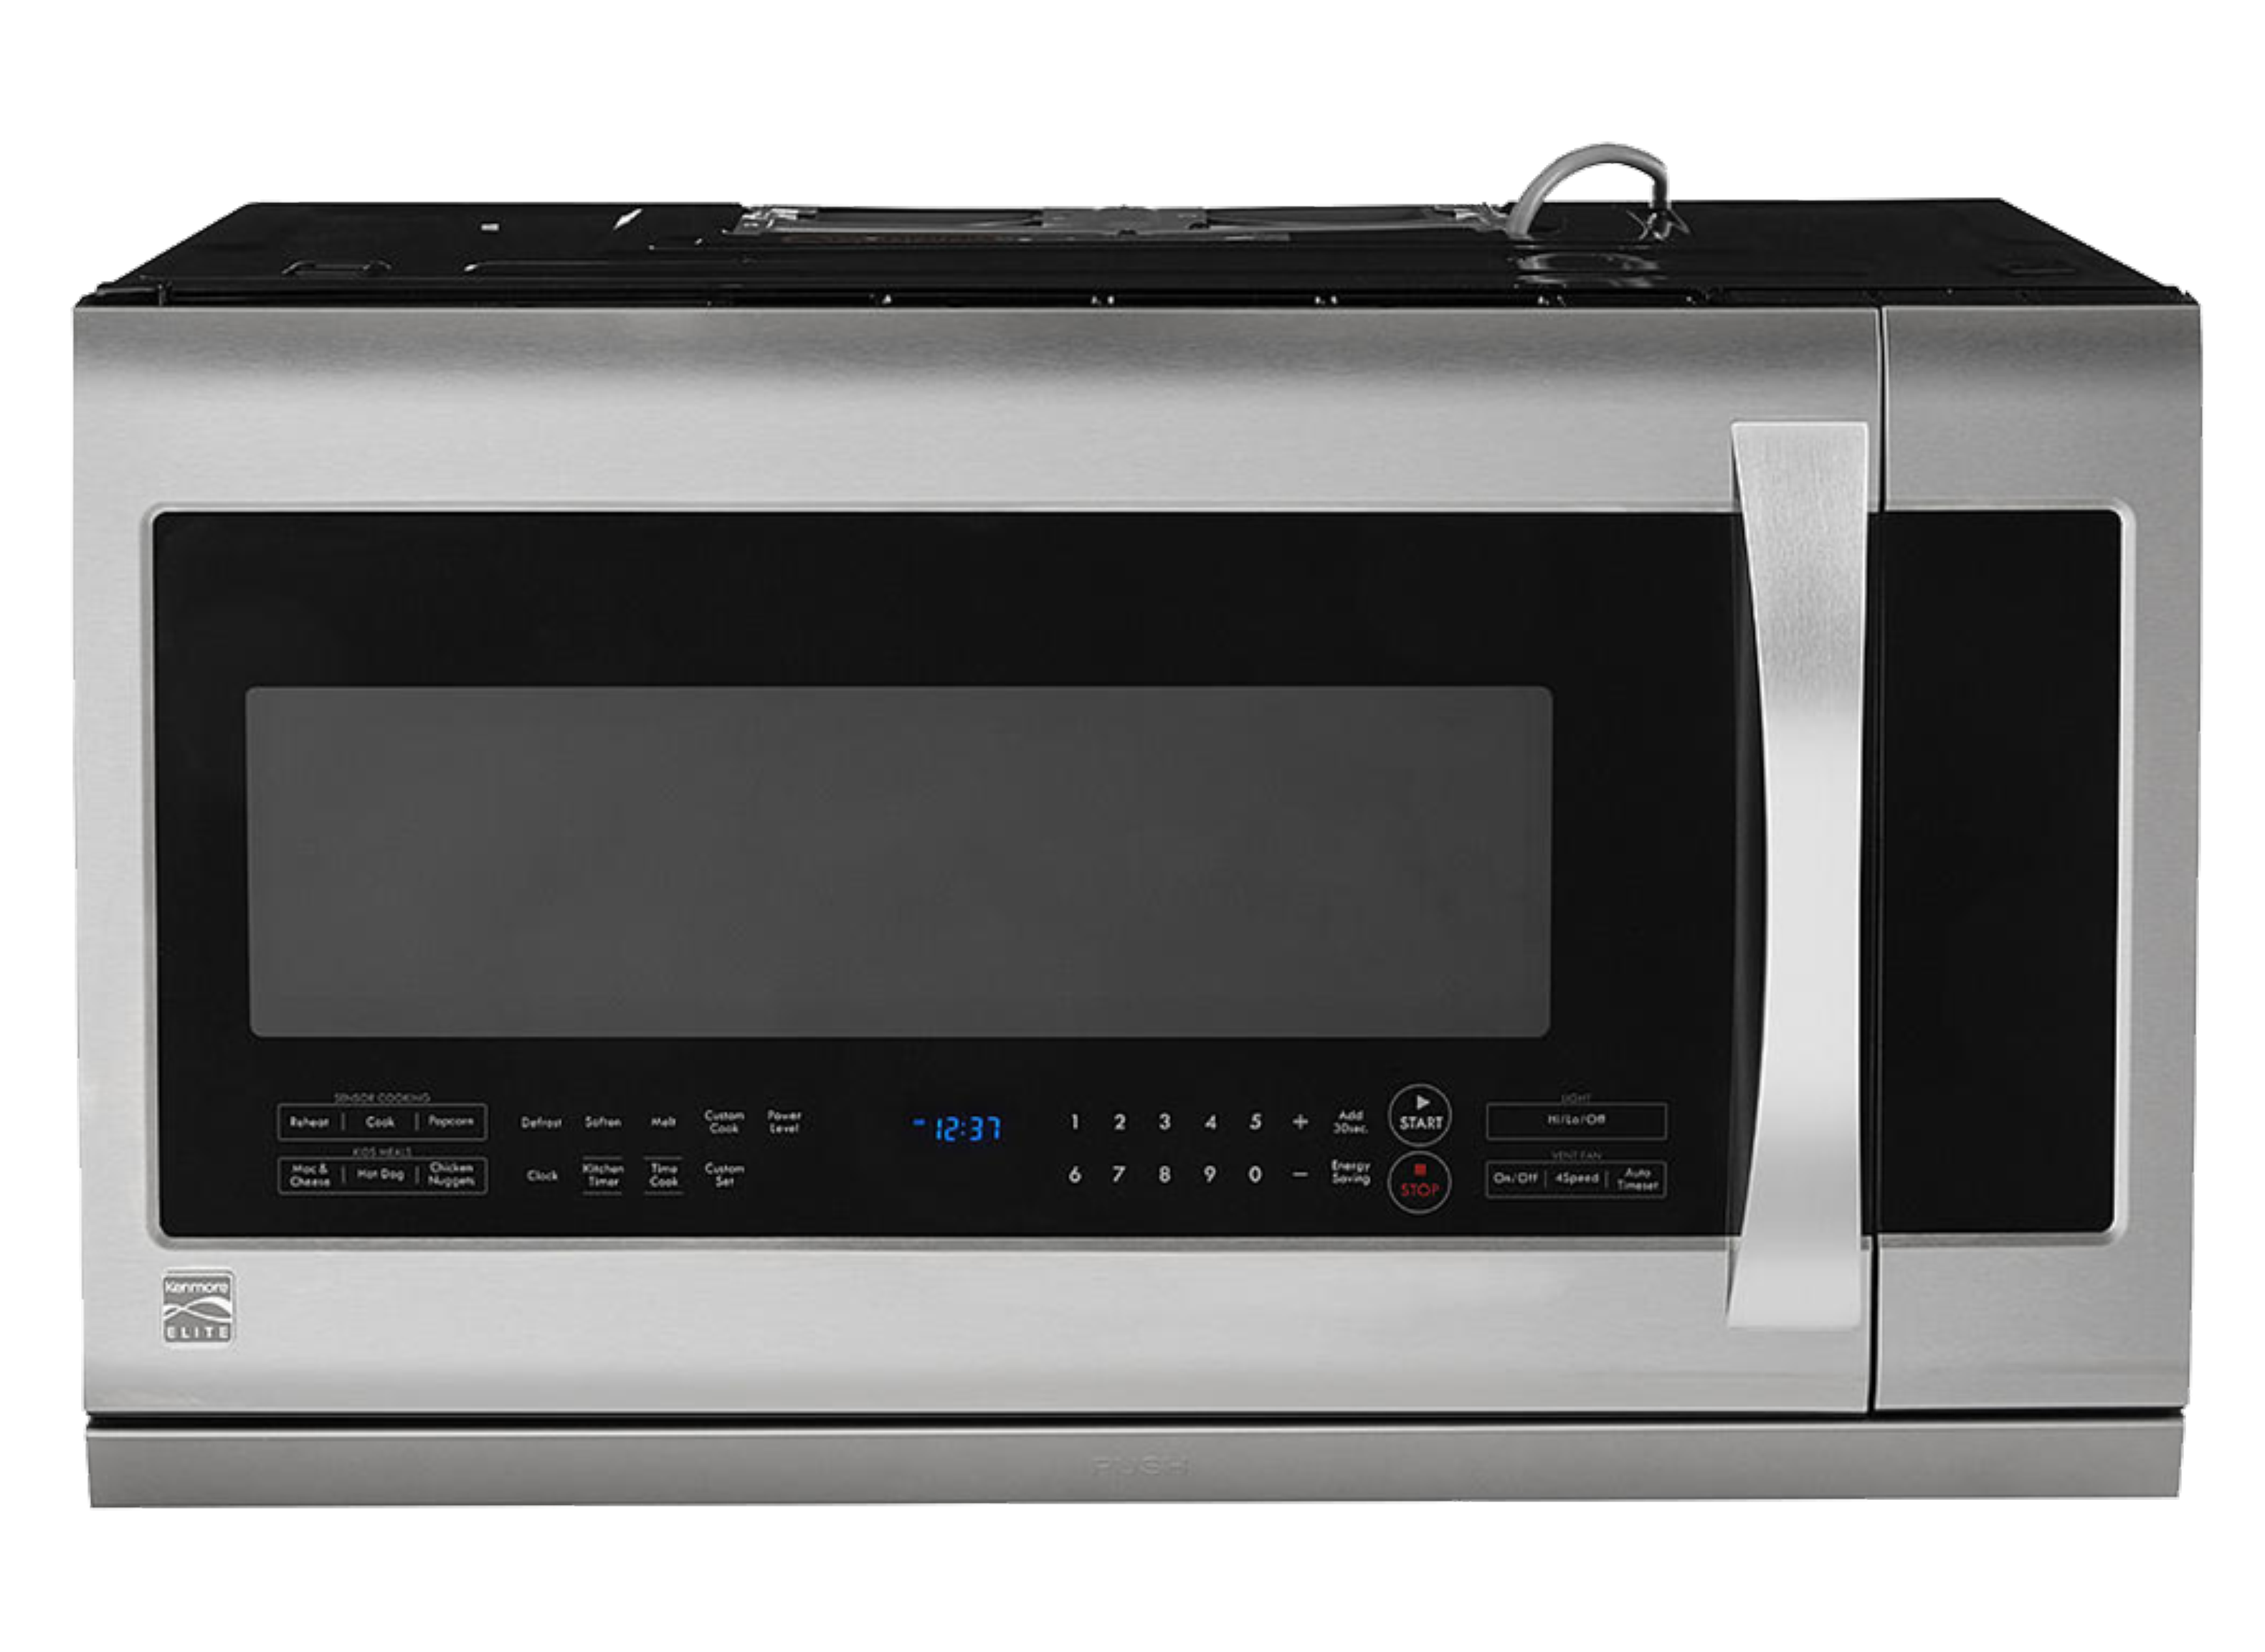 https://crdms.images.consumerreports.org/prod/products/cr/models/389138-overtherangemicrowaveovens-kenmore-87583.png